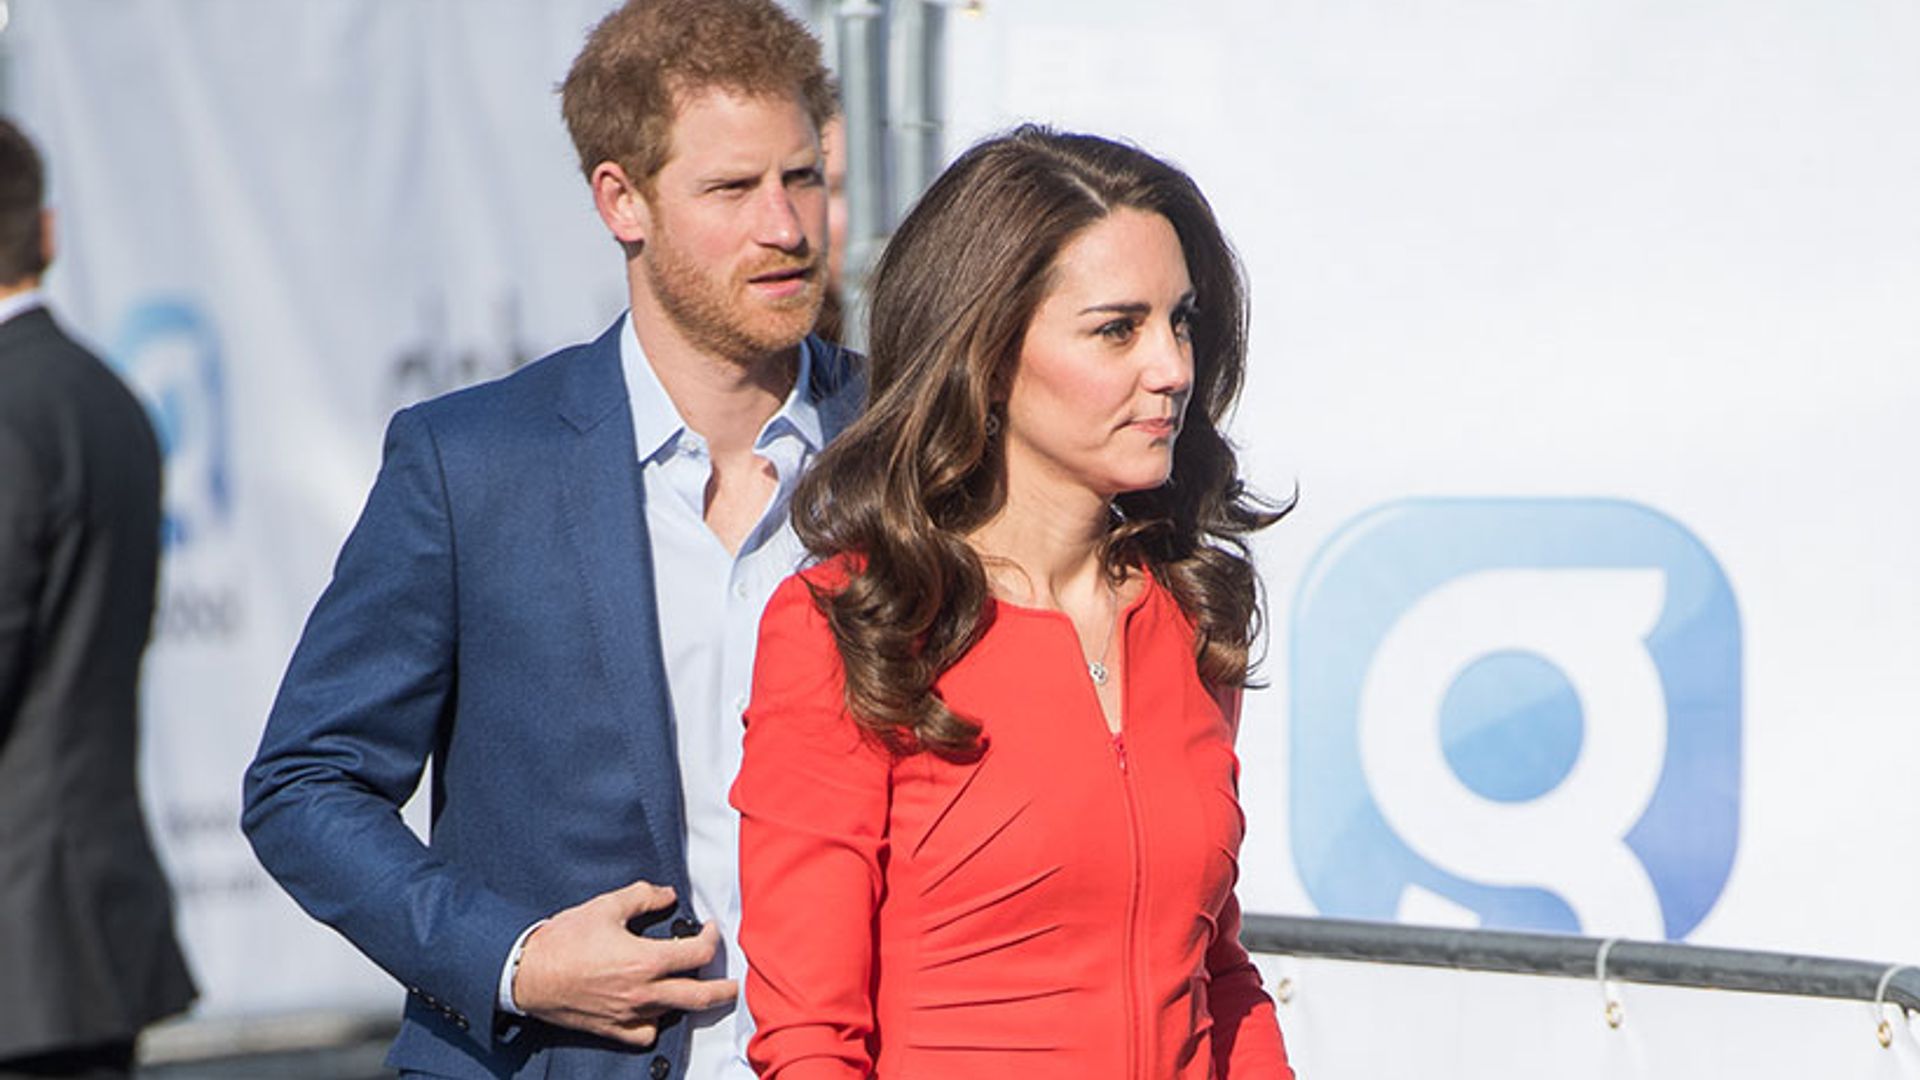 Kate Middleton stuns in red Armani suit on engagement in London | HELLO!